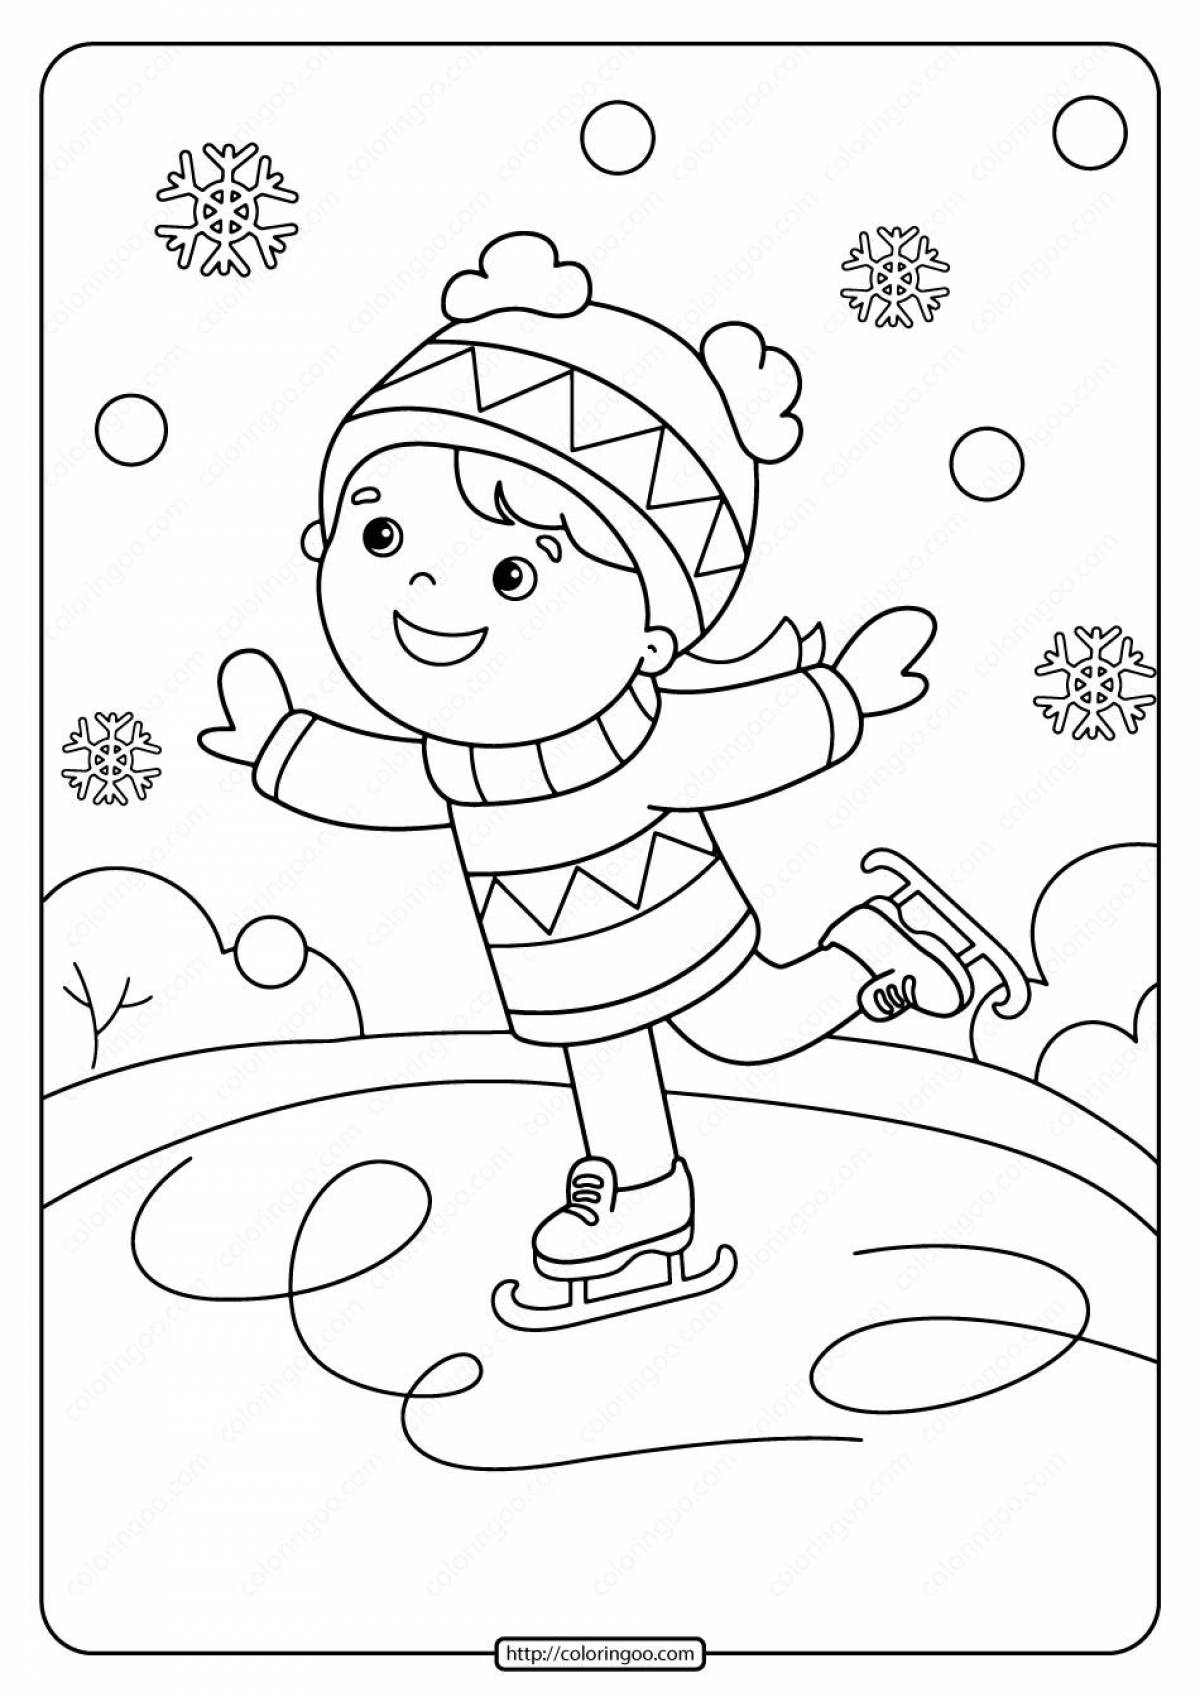 Incredible coloring book for kids 3-4 years old winter sports